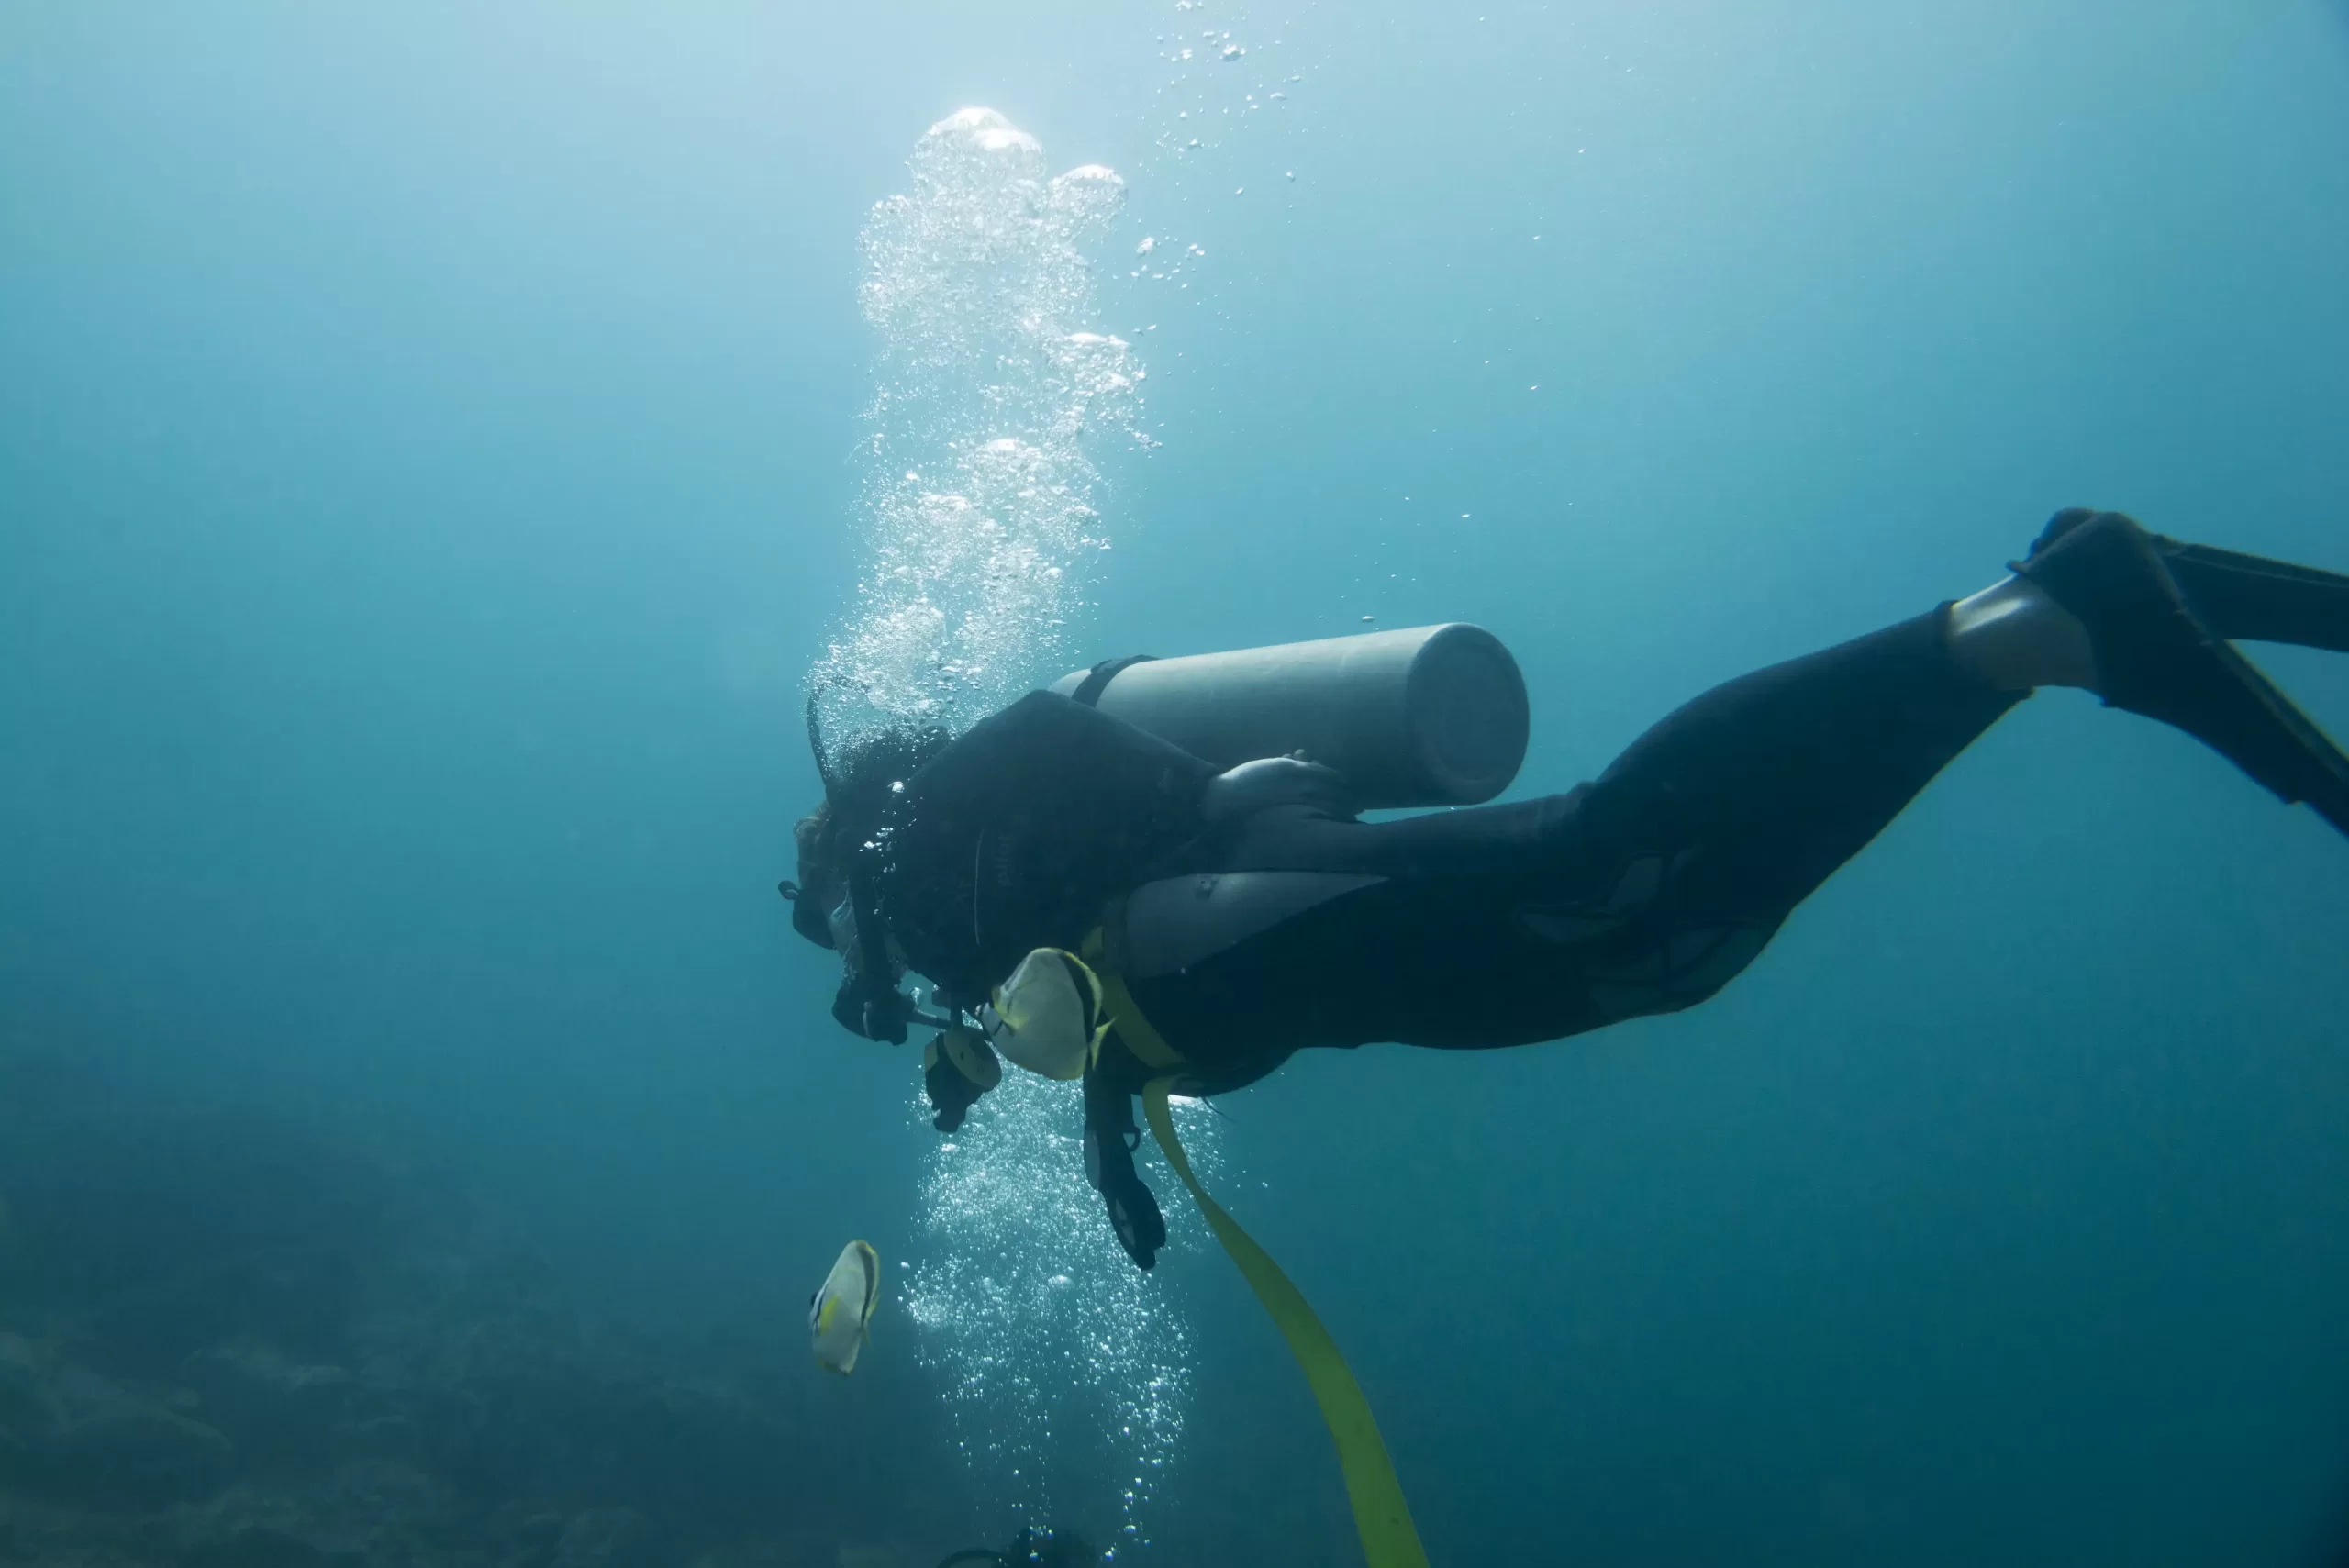 Why do scuba divers always wear black wetsuits?